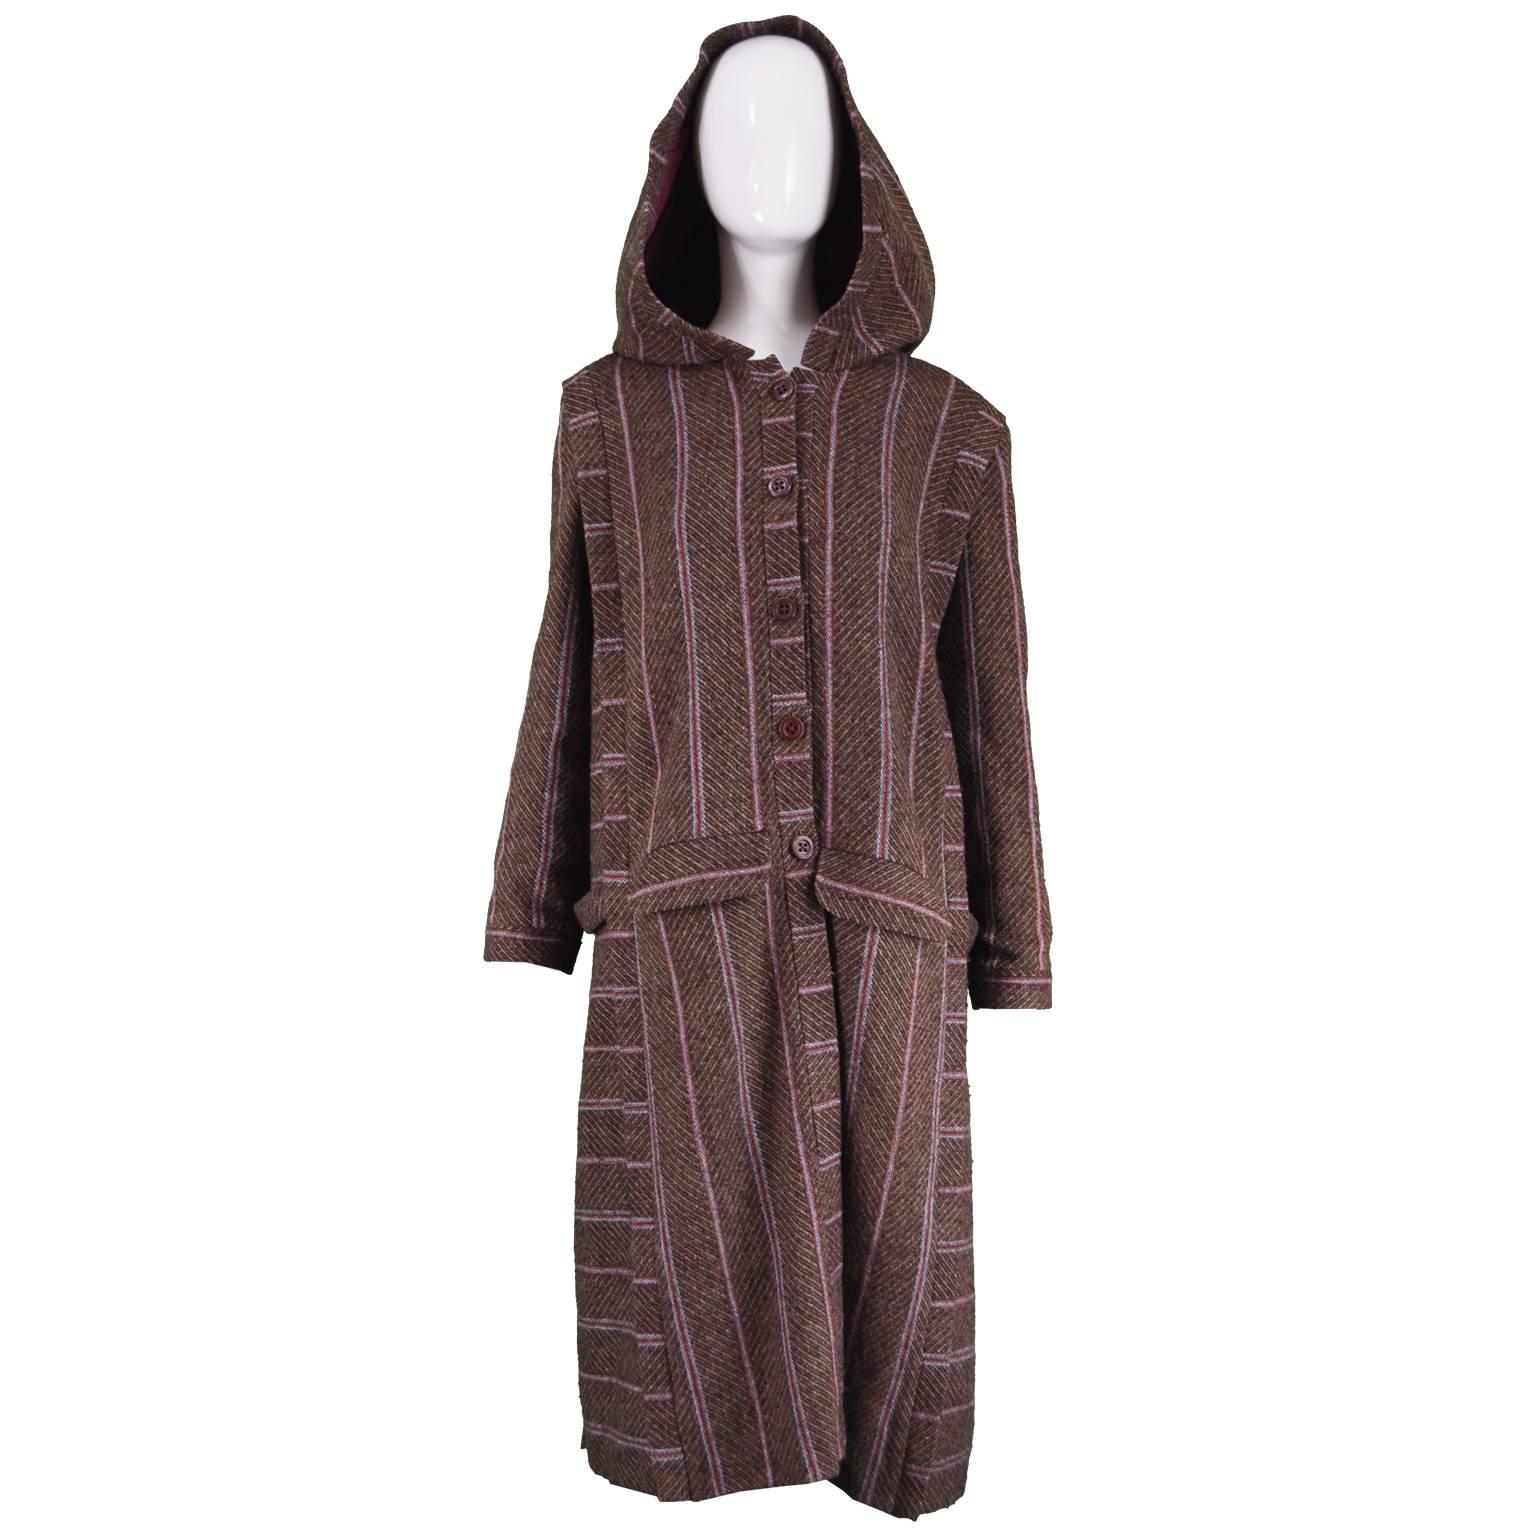 Bill Gibb Dramatic Brown Wool Striped Vintage Coat with Oversized Hood, 1970s For Sale